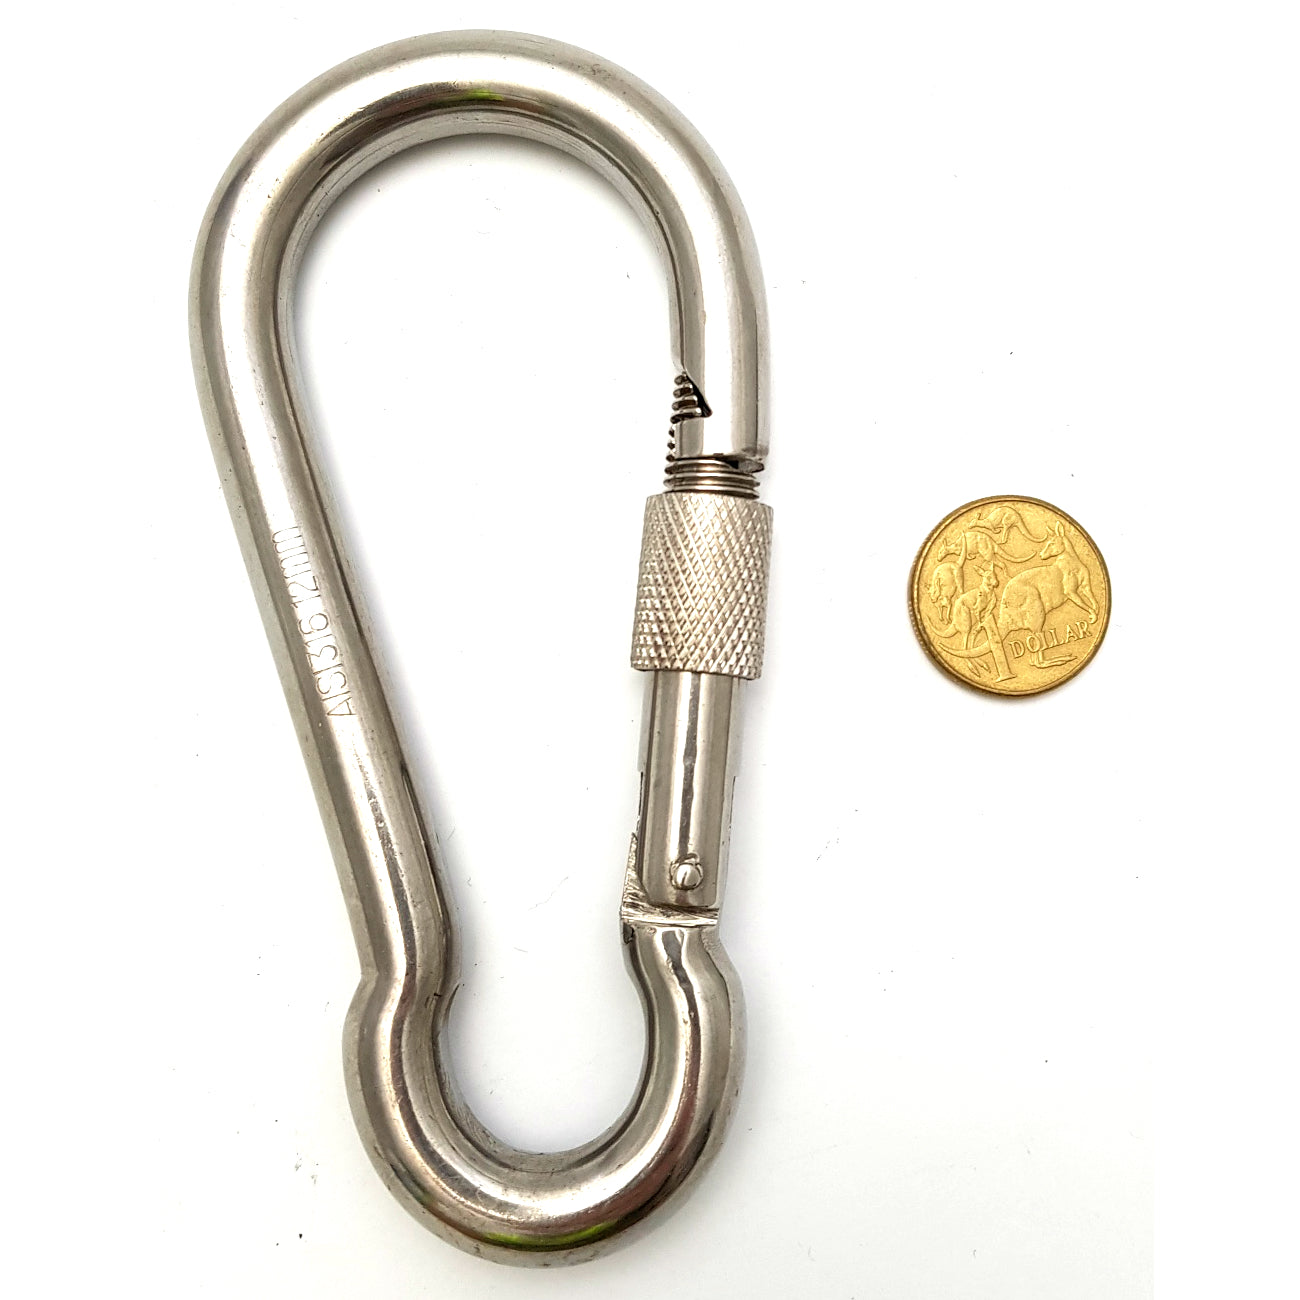 Stainless steel snap hook with locking screw gate, size 12mm. Melbourne, Australia